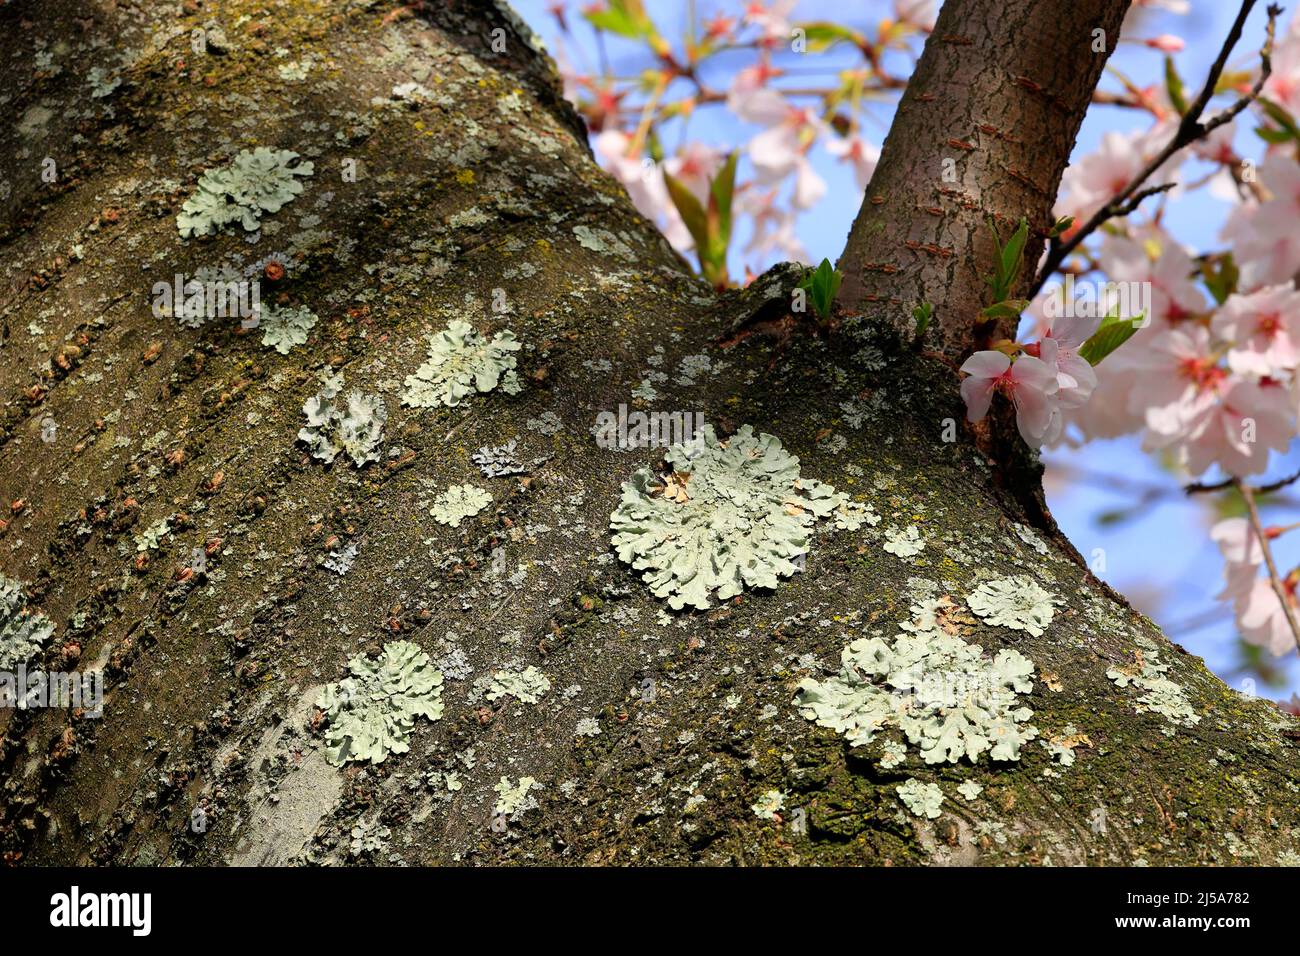 Greenshield lichens, Flavoparmelia caperata, foliose lichens growing on the bark of a cherry tree in full bloom. Stock Photo